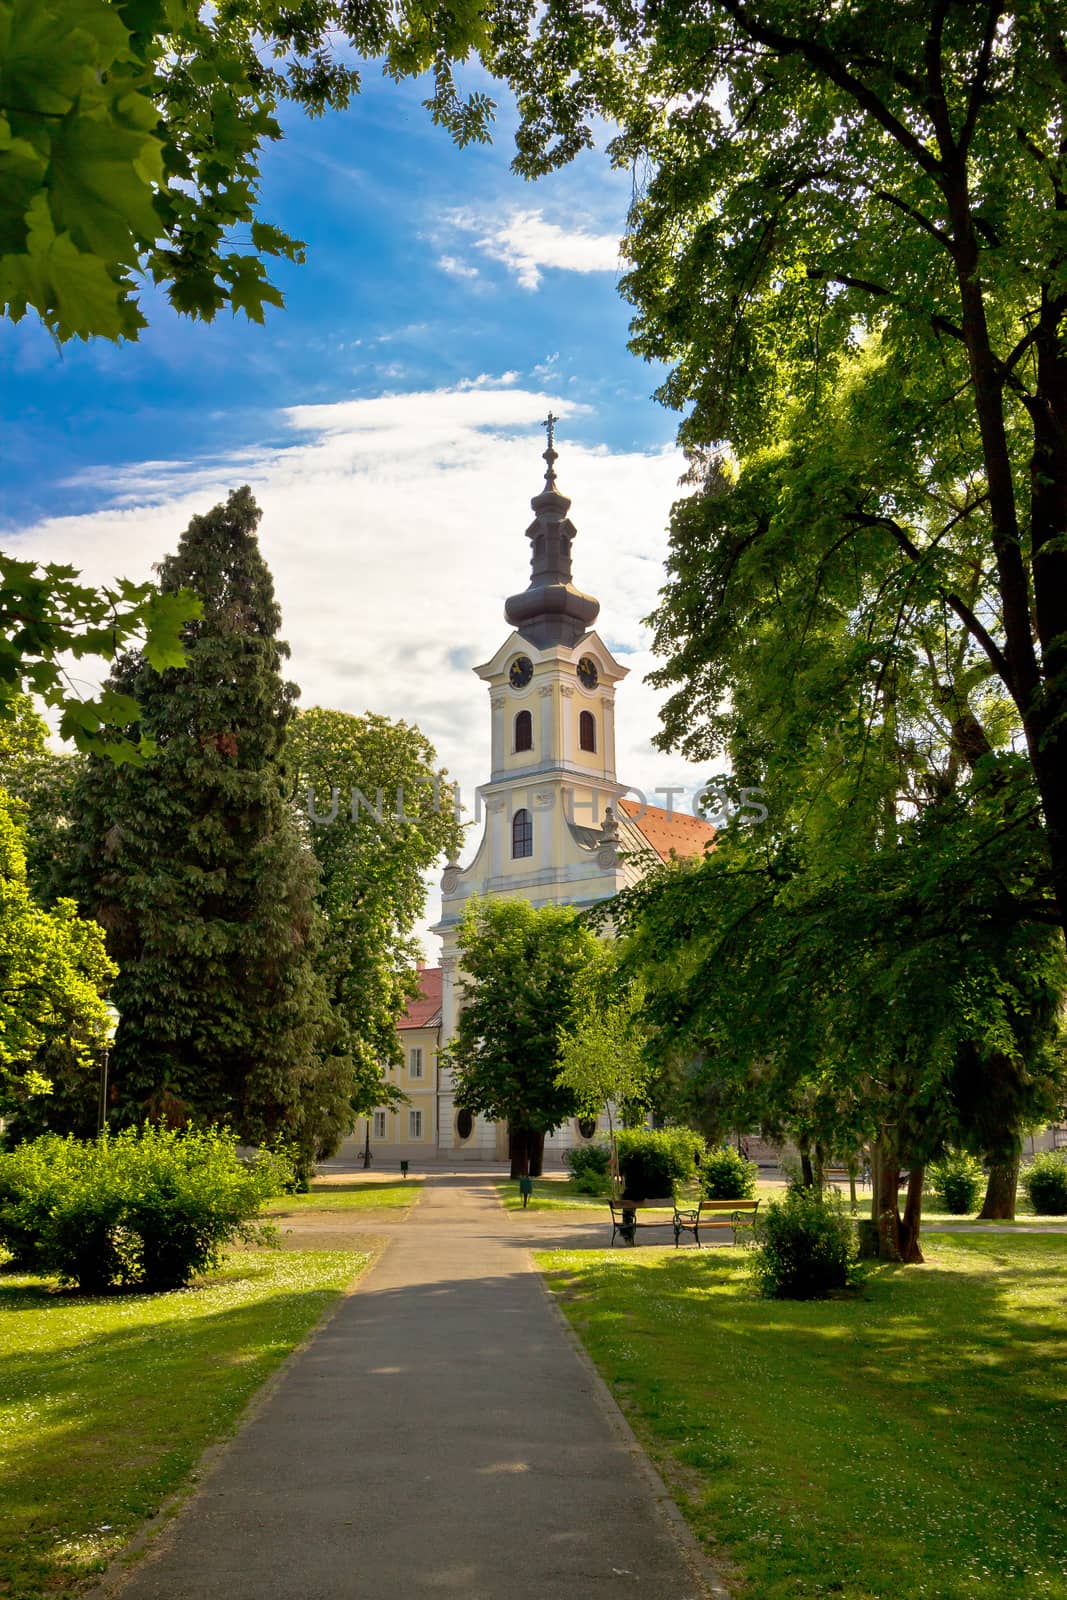 Town of Bjelovar park and church vertical view, Croatia